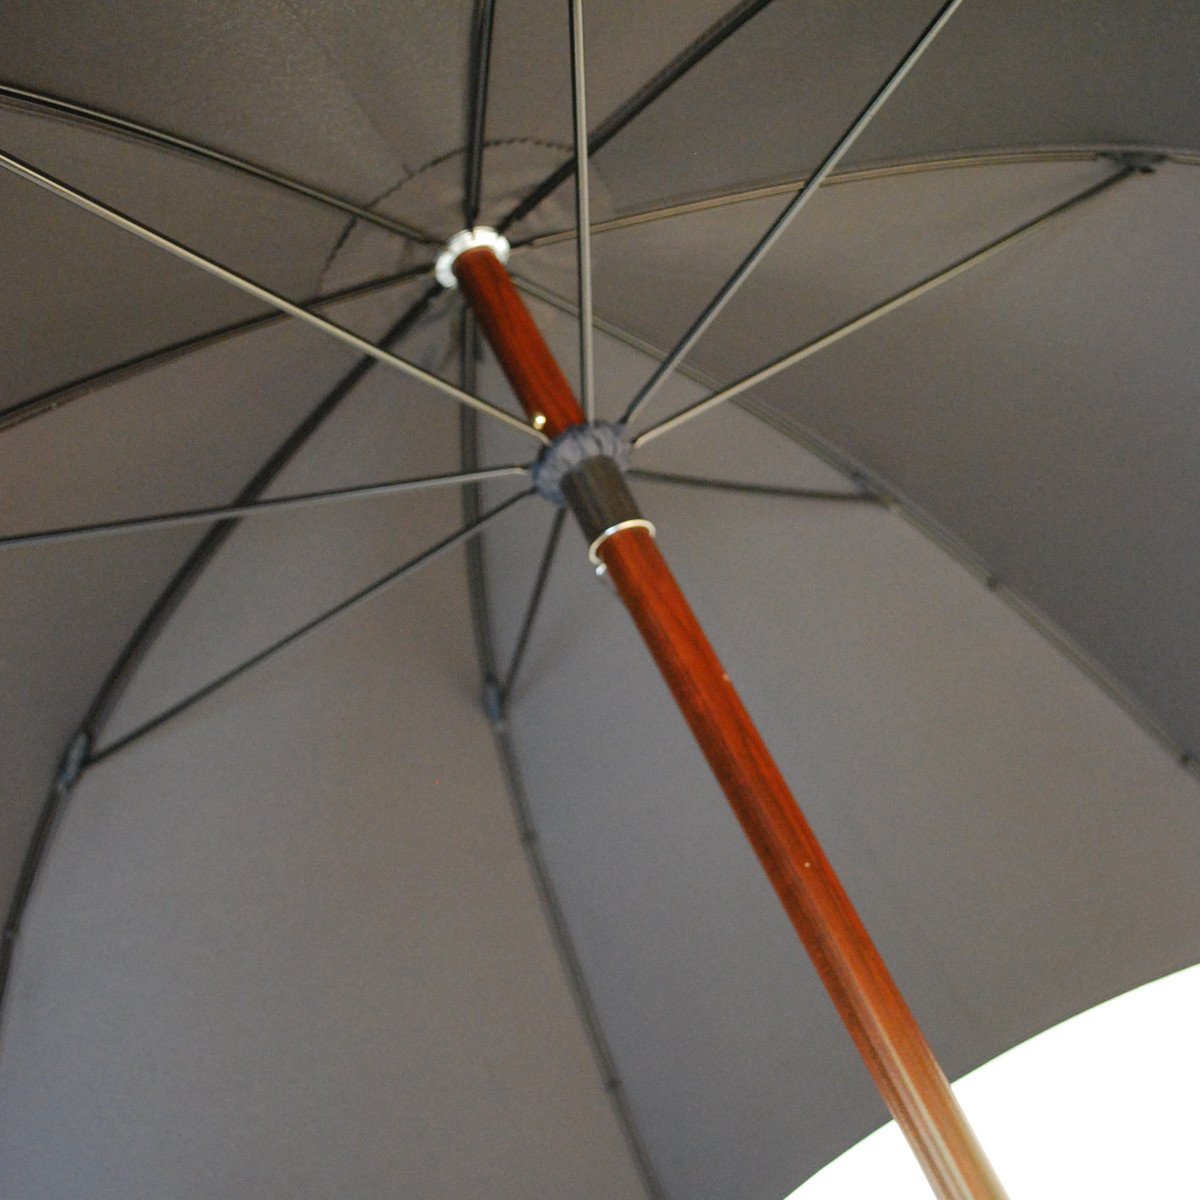 Polished Cherry Gent's Umbrella with Sterling Nose Cap-Gent's Umbrella-Sterling-and-Burke